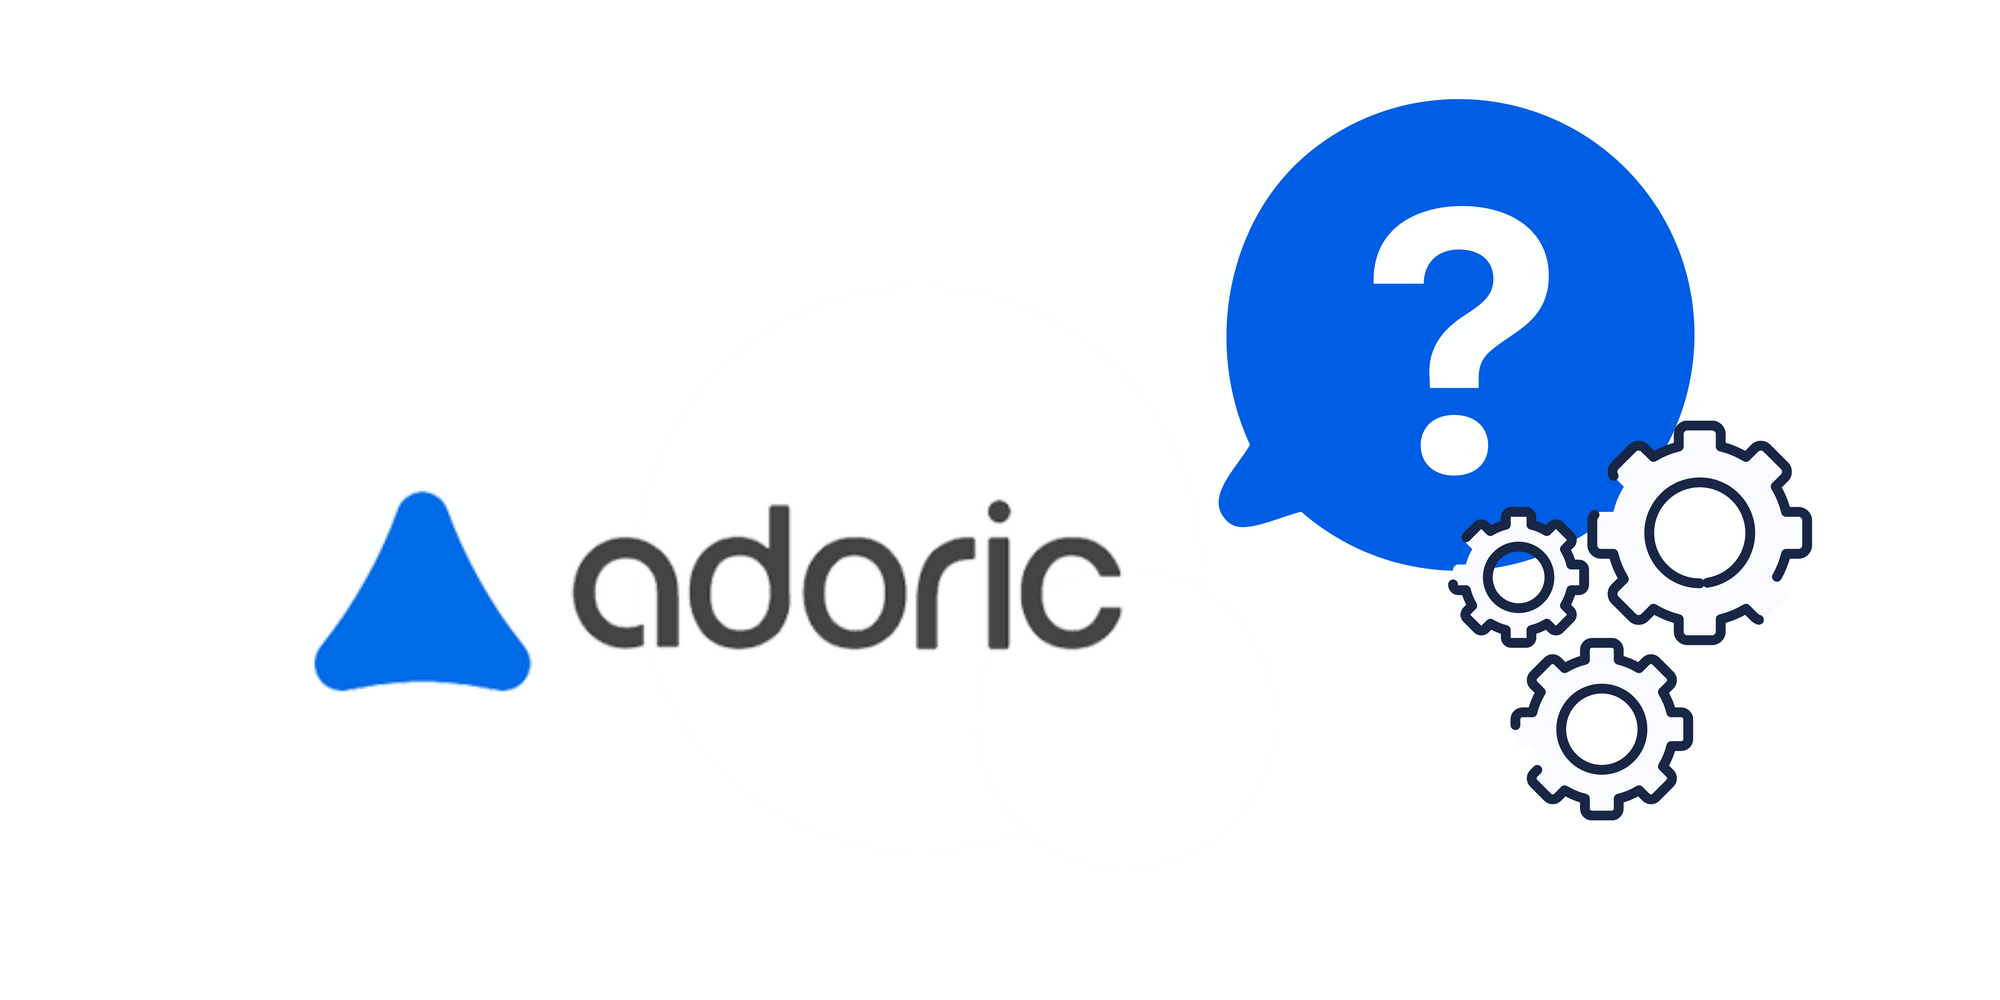 Adoric icon, a question mark and settings icon on white background